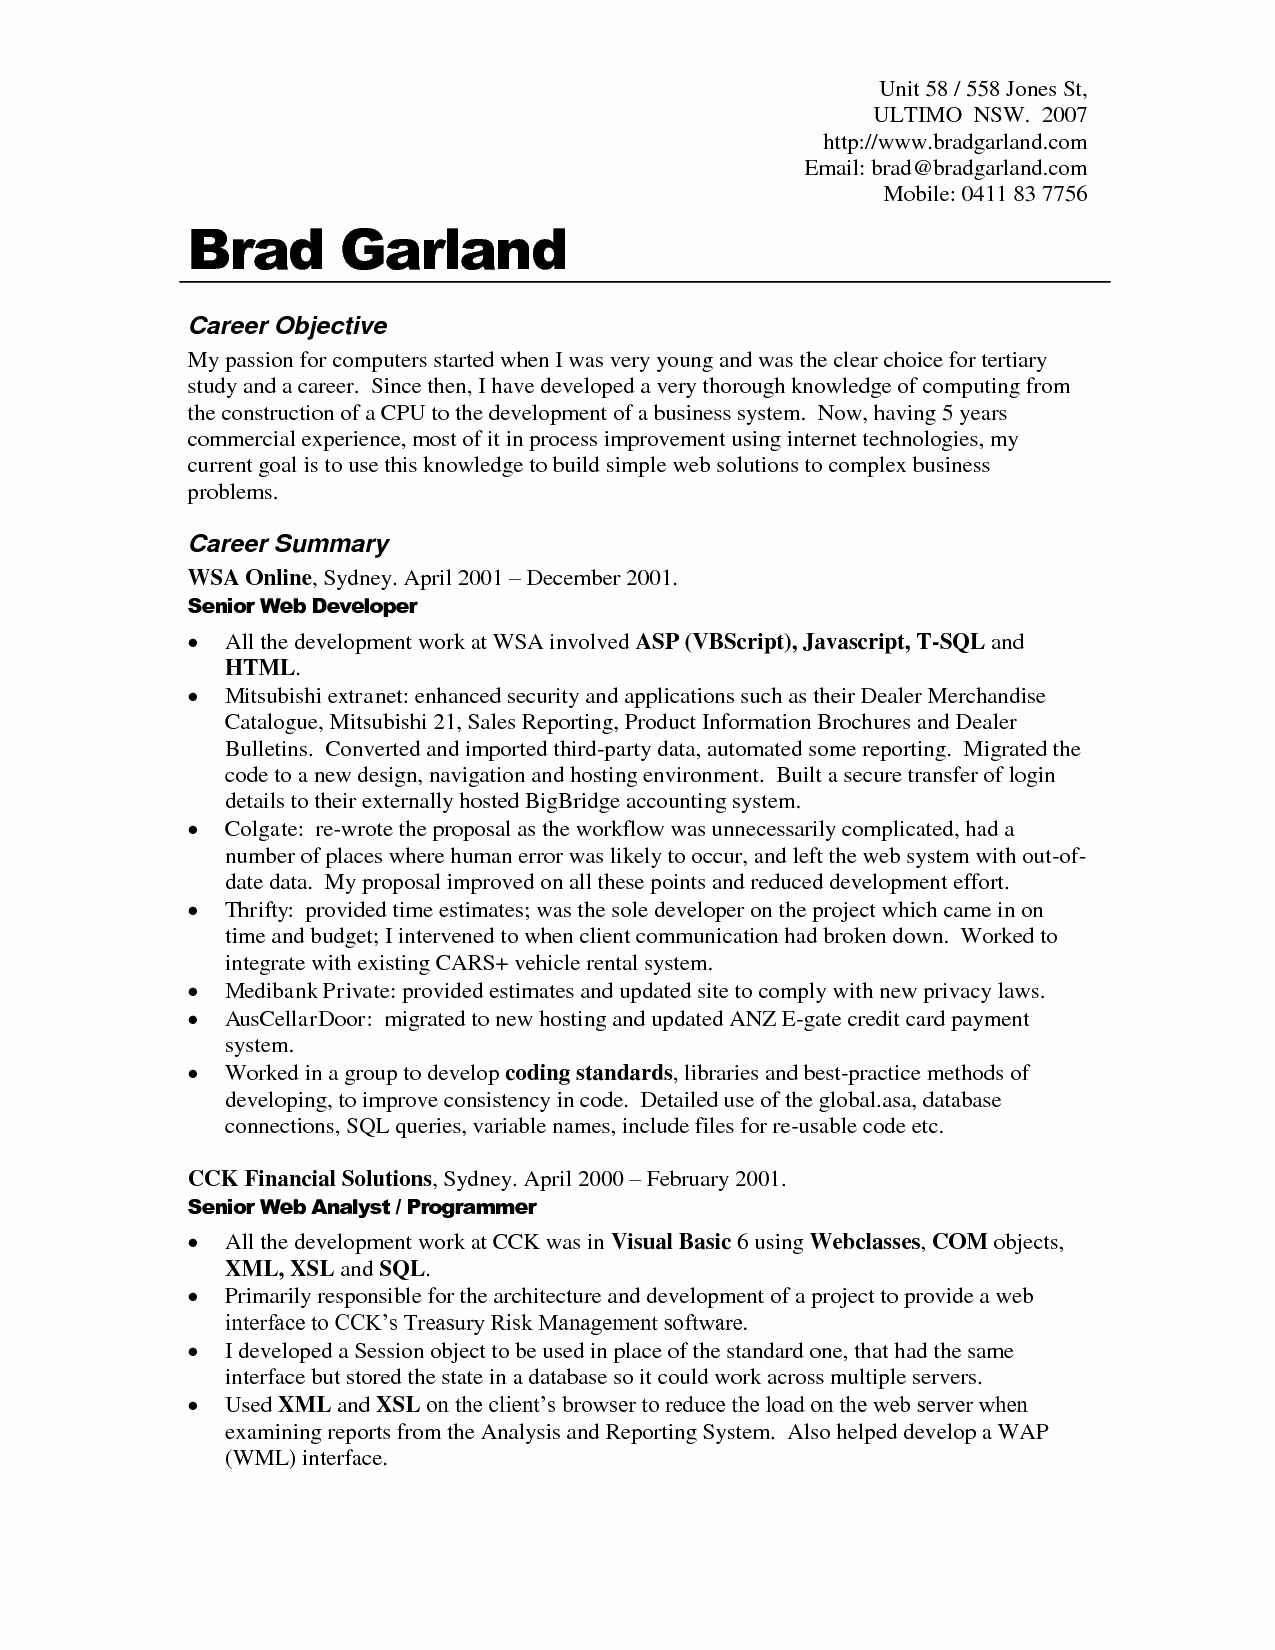 Cover Letter Template for Teenager - 20 Cover Letter for Teenager